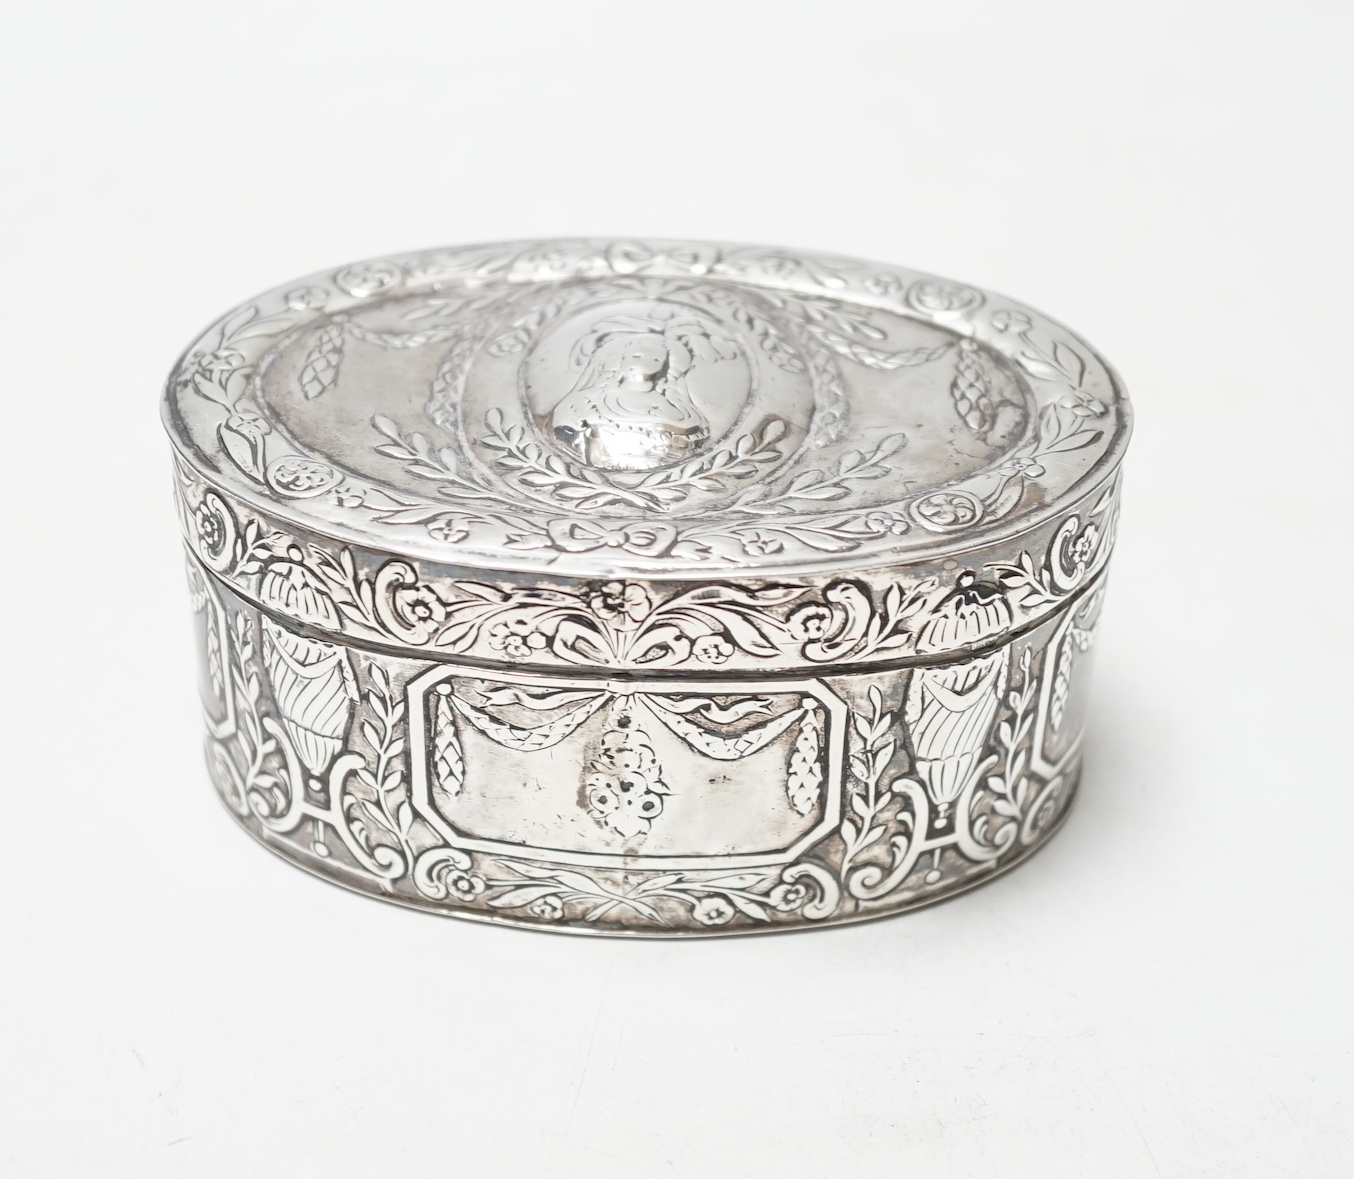 An Edwardian Hanau silver oval box, with hinged cover and foliate and swag decoration, import marks for Berthold Muller, London, 1902, 10.2cm, 5.4oz.